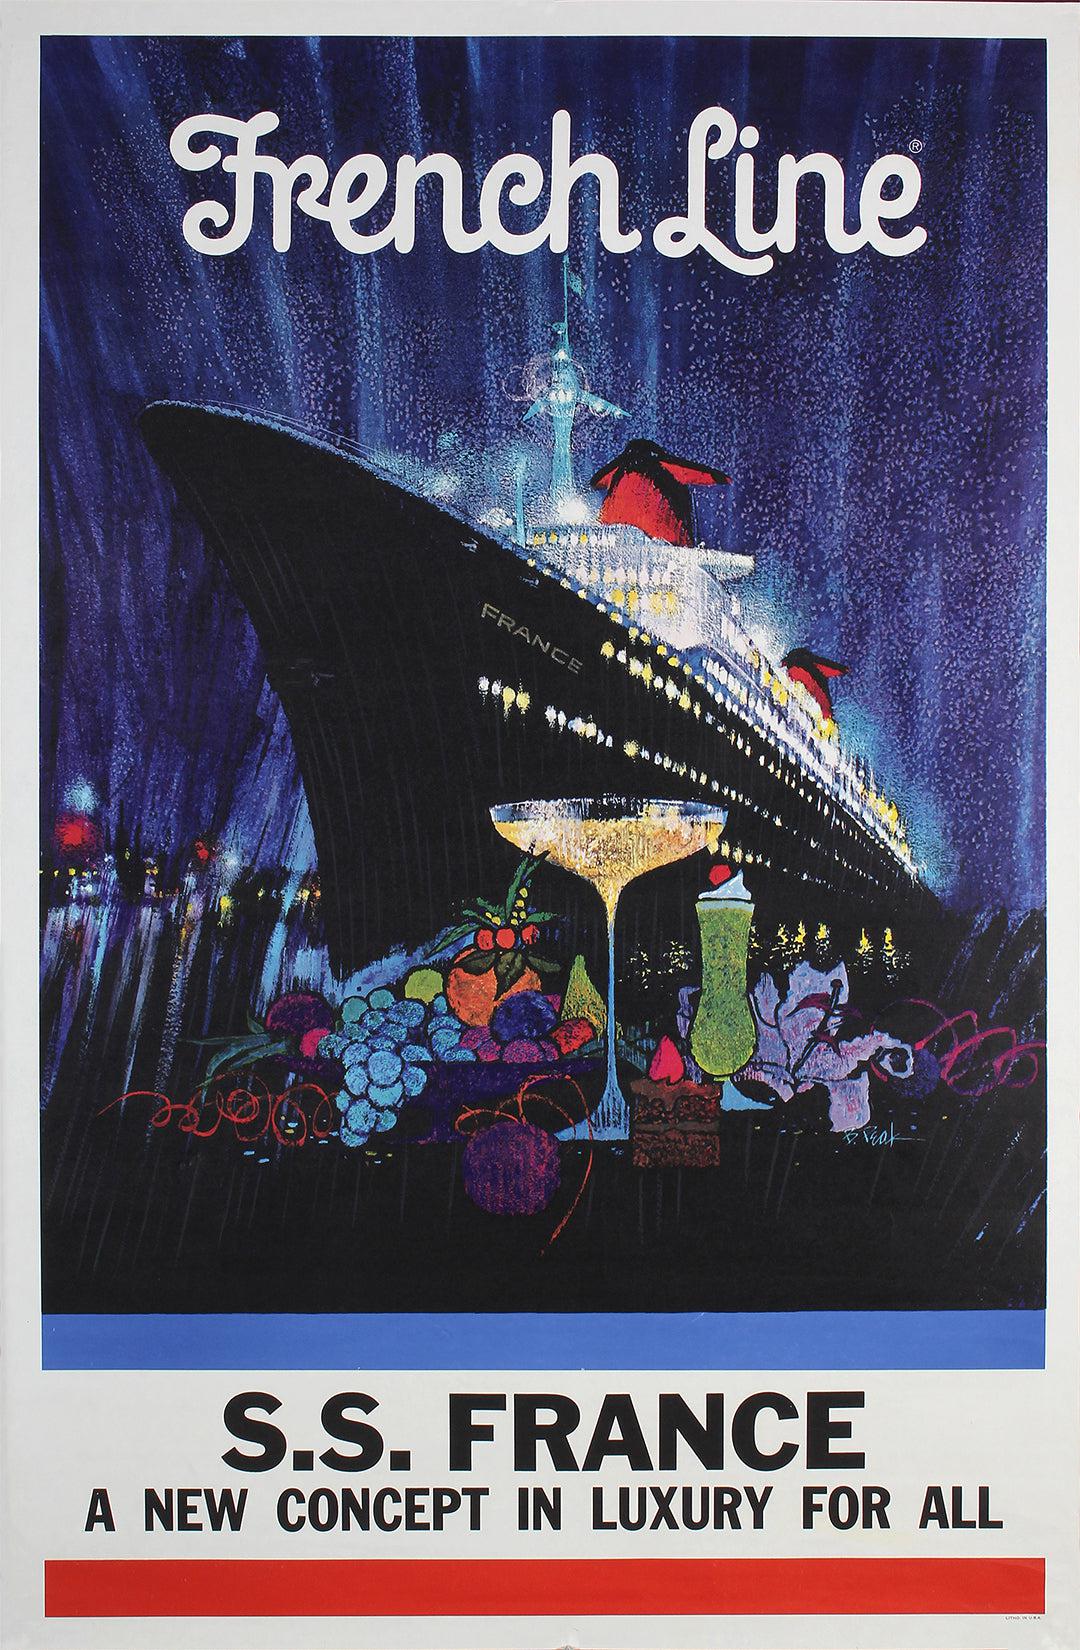 Vintage Boat Poster, Ship Poster Classics of France, Italian and French  Boat Posters